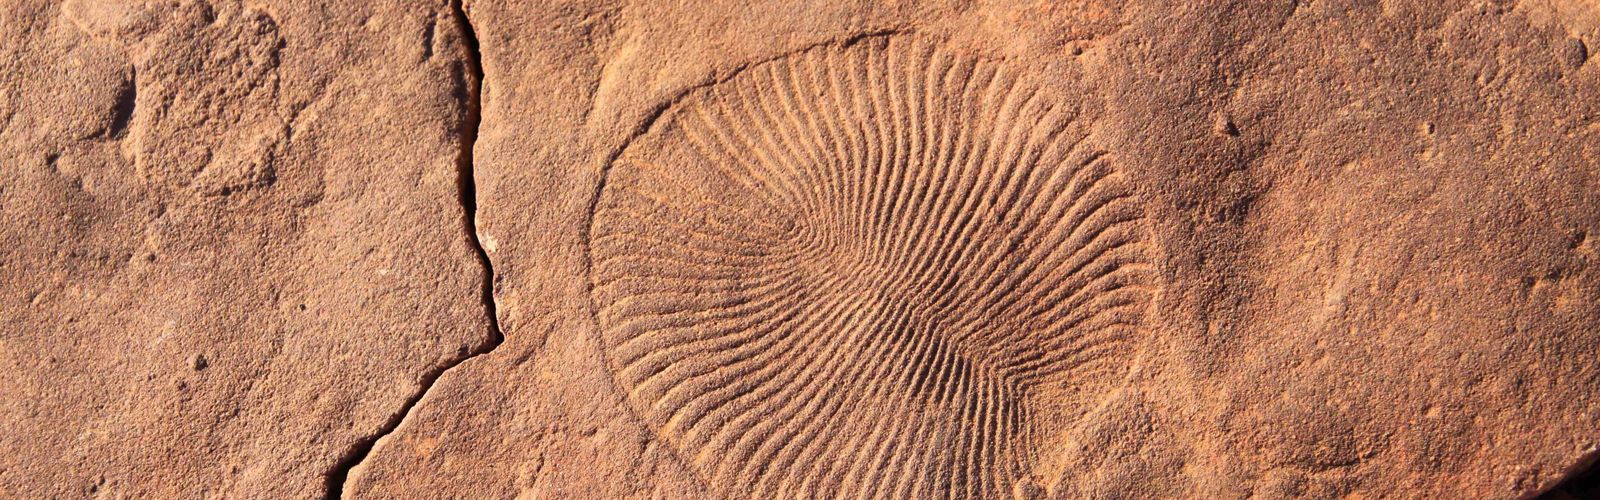 a circular fossil in a reddish stone surface.